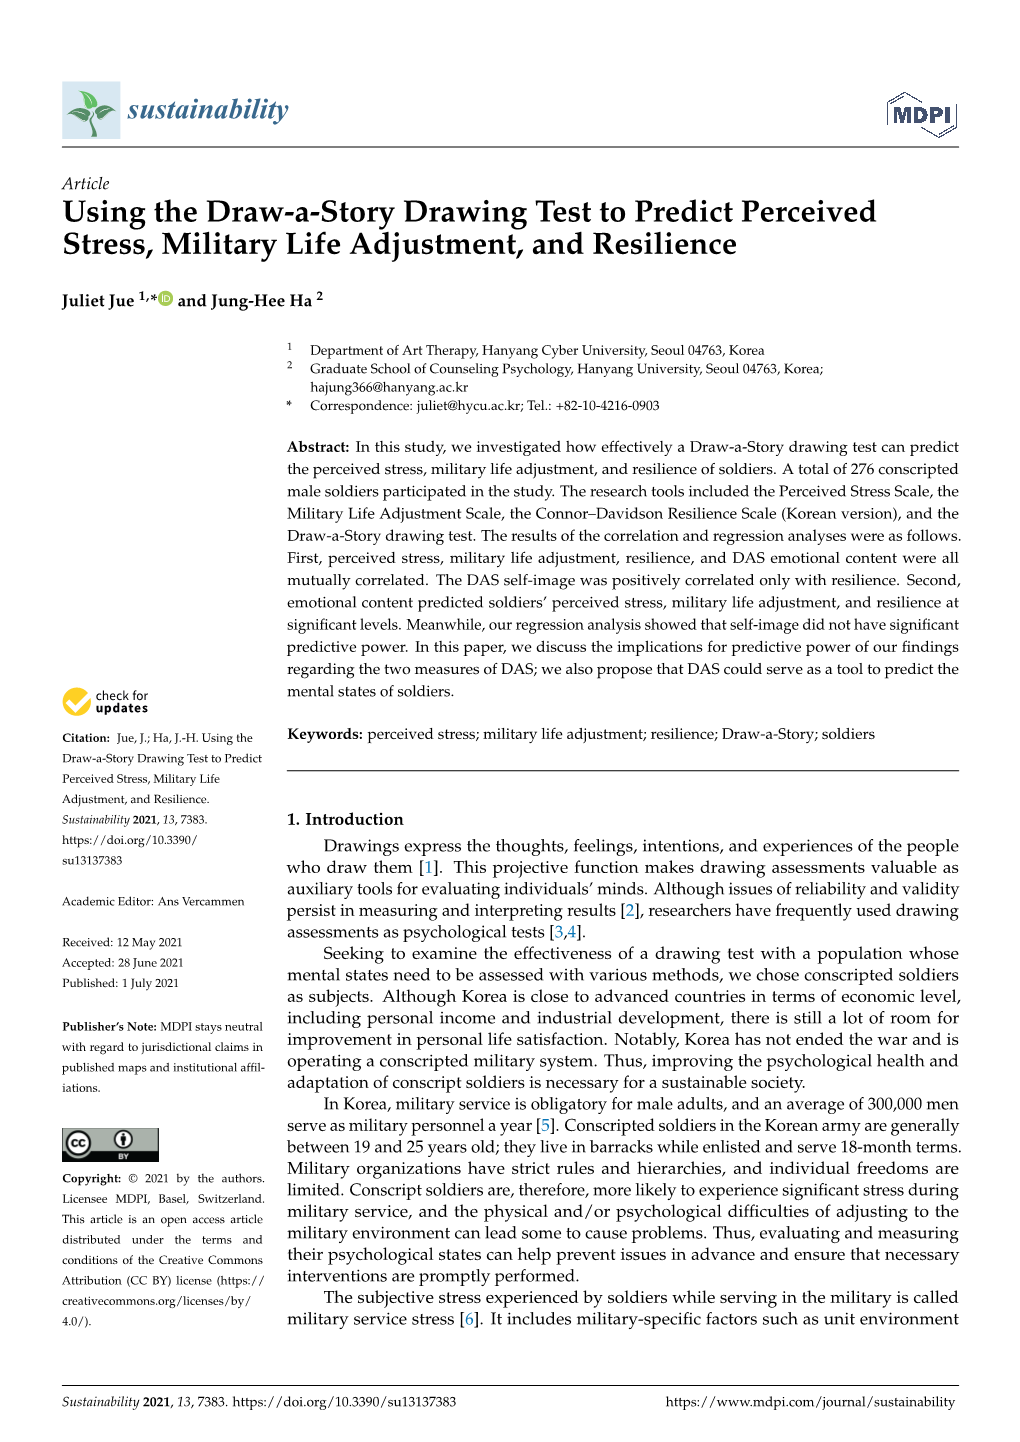 Using the Draw-A-Story Drawing Test to Predict Perceived Stress, Military Life Adjustment, and Resilience